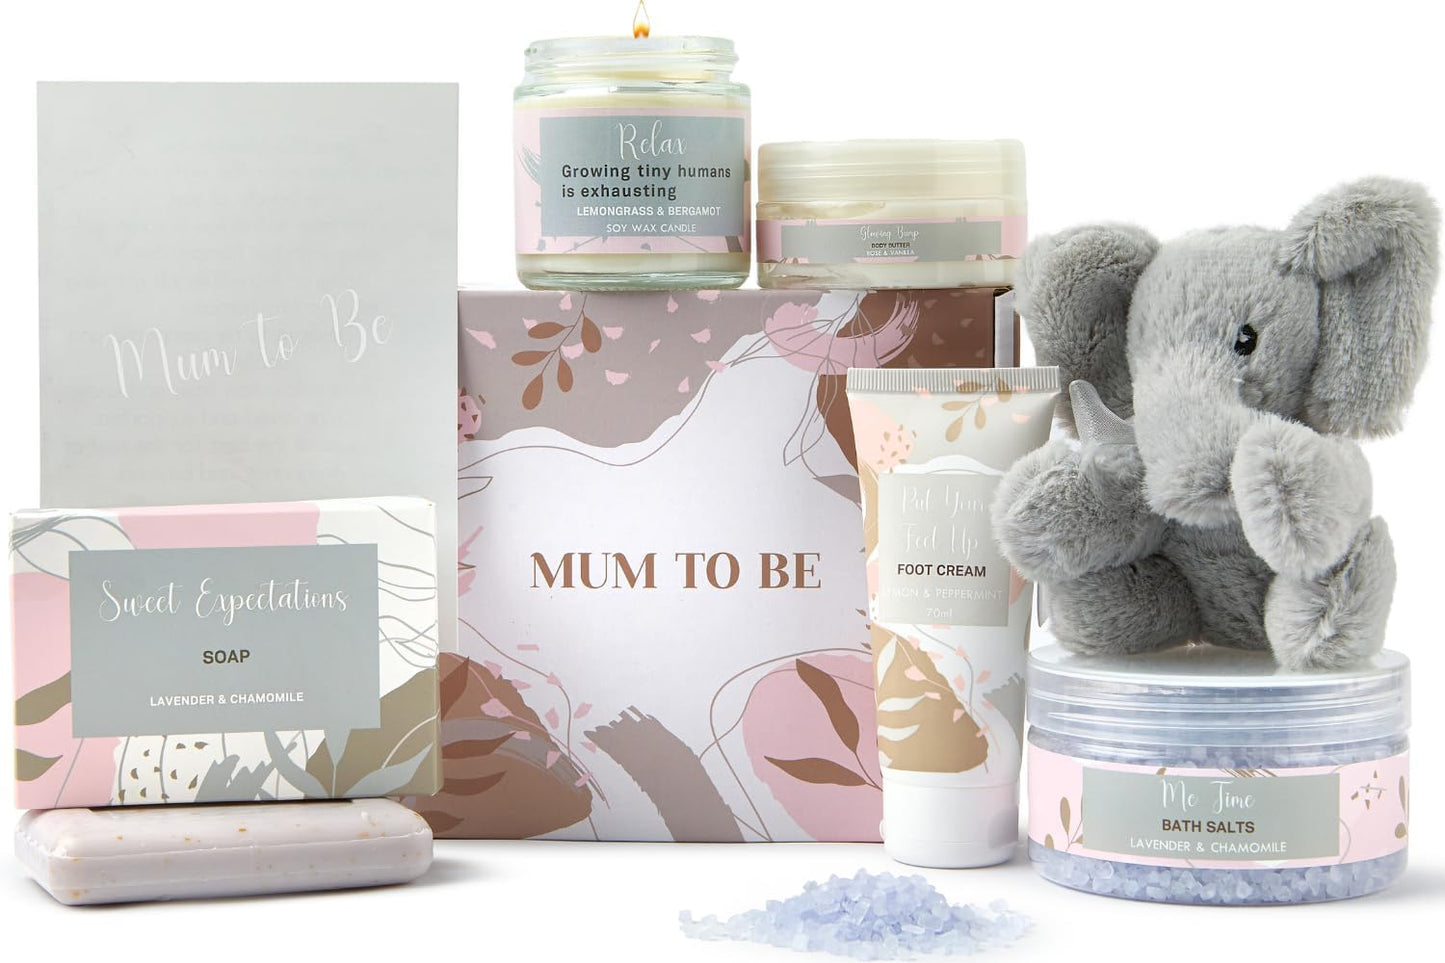 Pamper Hamper Gifts for Mums to Be - Relaxing Self Care Baby Shower Present for New Mum - Pamper Hamper Set - Blissful Spa Experience - Ultimate Beauty Hamper for Mummy and Baby